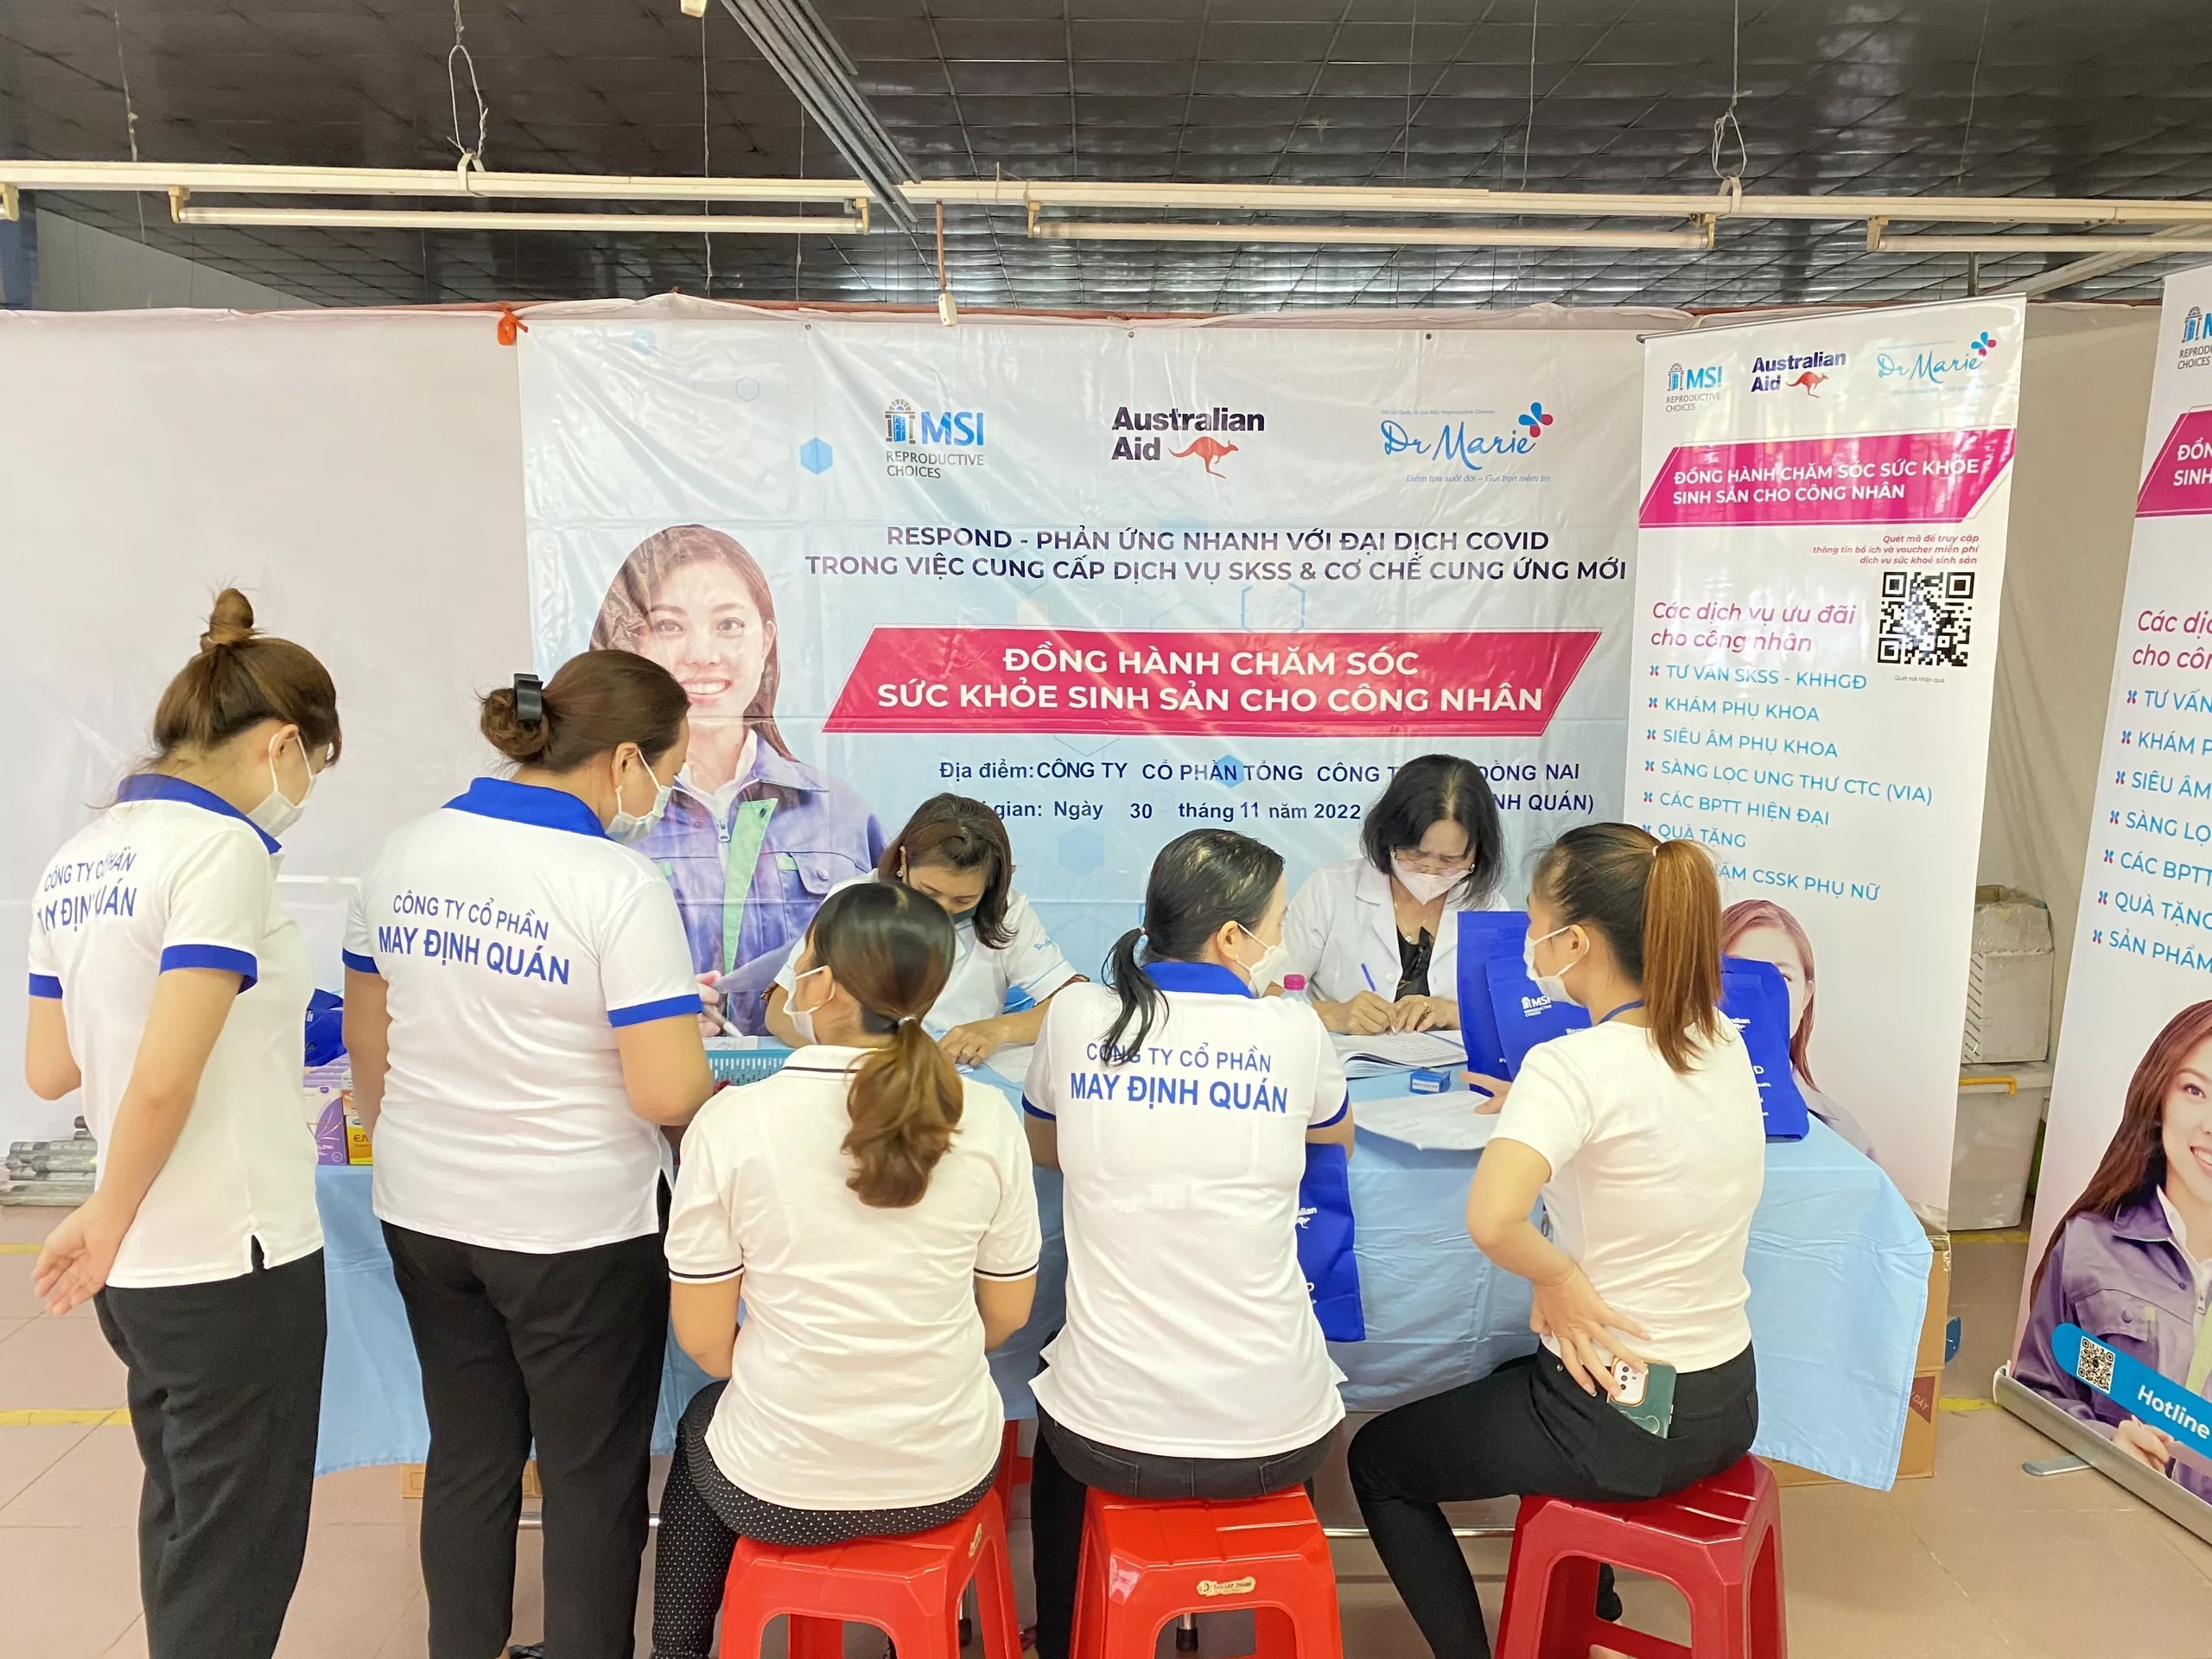 15,000 female factory workers in Vietnam receive support to access sexual and reproductive health information and services